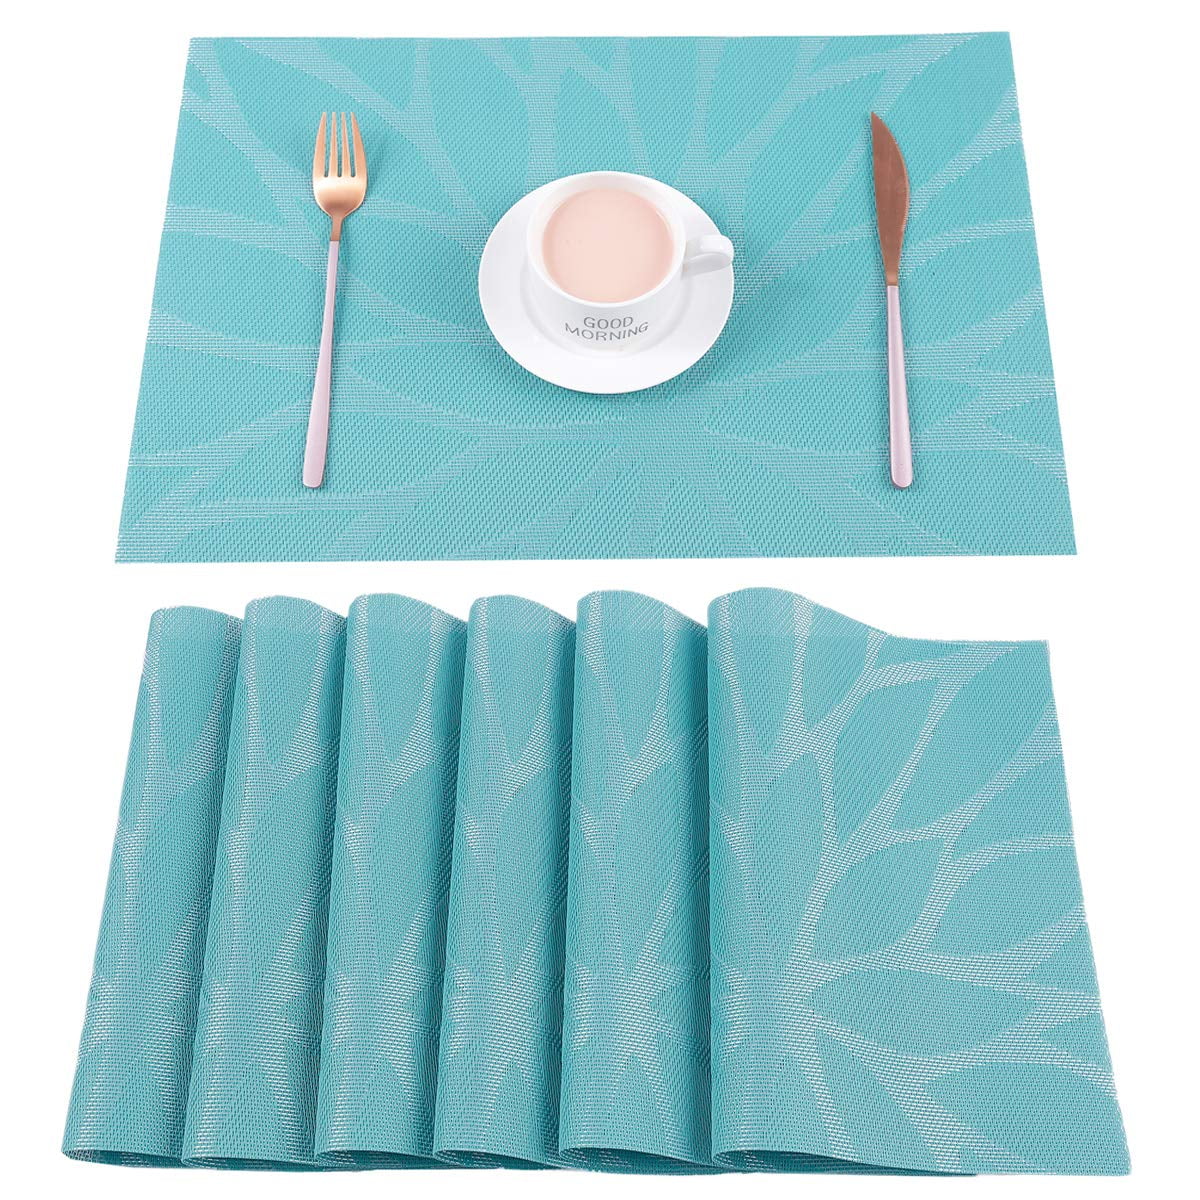 Heat-resistant Placemats Stain Resistant Anti-skid Bamboo Placement mats Christmas Placemats dining table Skanthaguru Exports set of 6 13x18 inch brown and blue eco friendly for kitchen table